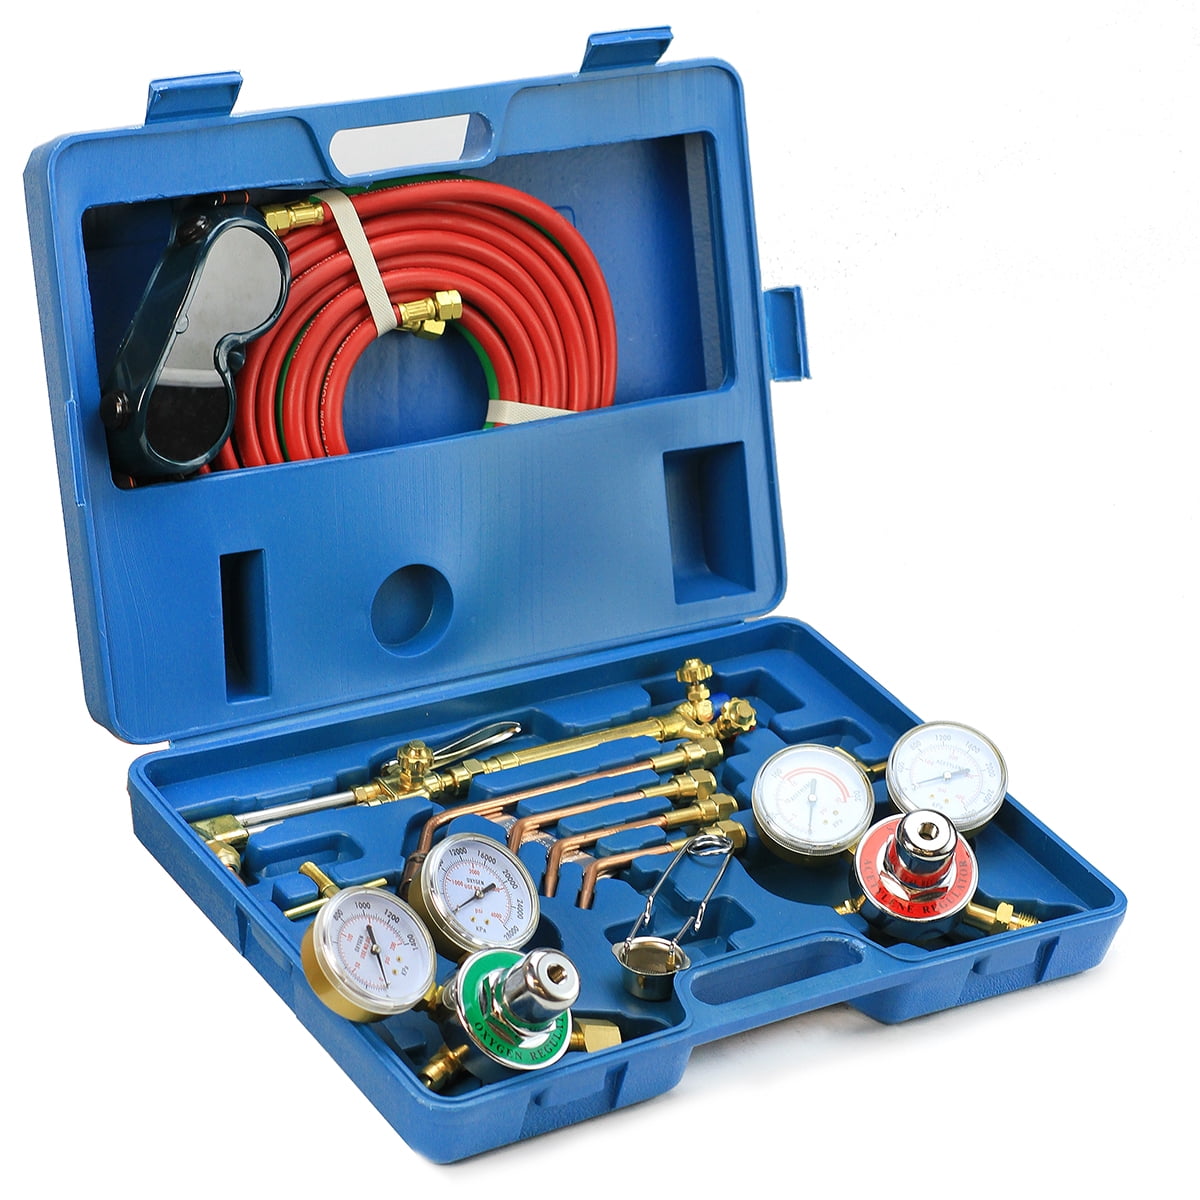 Blue Portable Oxy Acetylene Oxygen Brazing Gas Welding & Cutting Kit Heavy Duty Cutting System Professional Tool Set Victor Type w/Case and Hose Gas Welding Cutting Torch Kit 